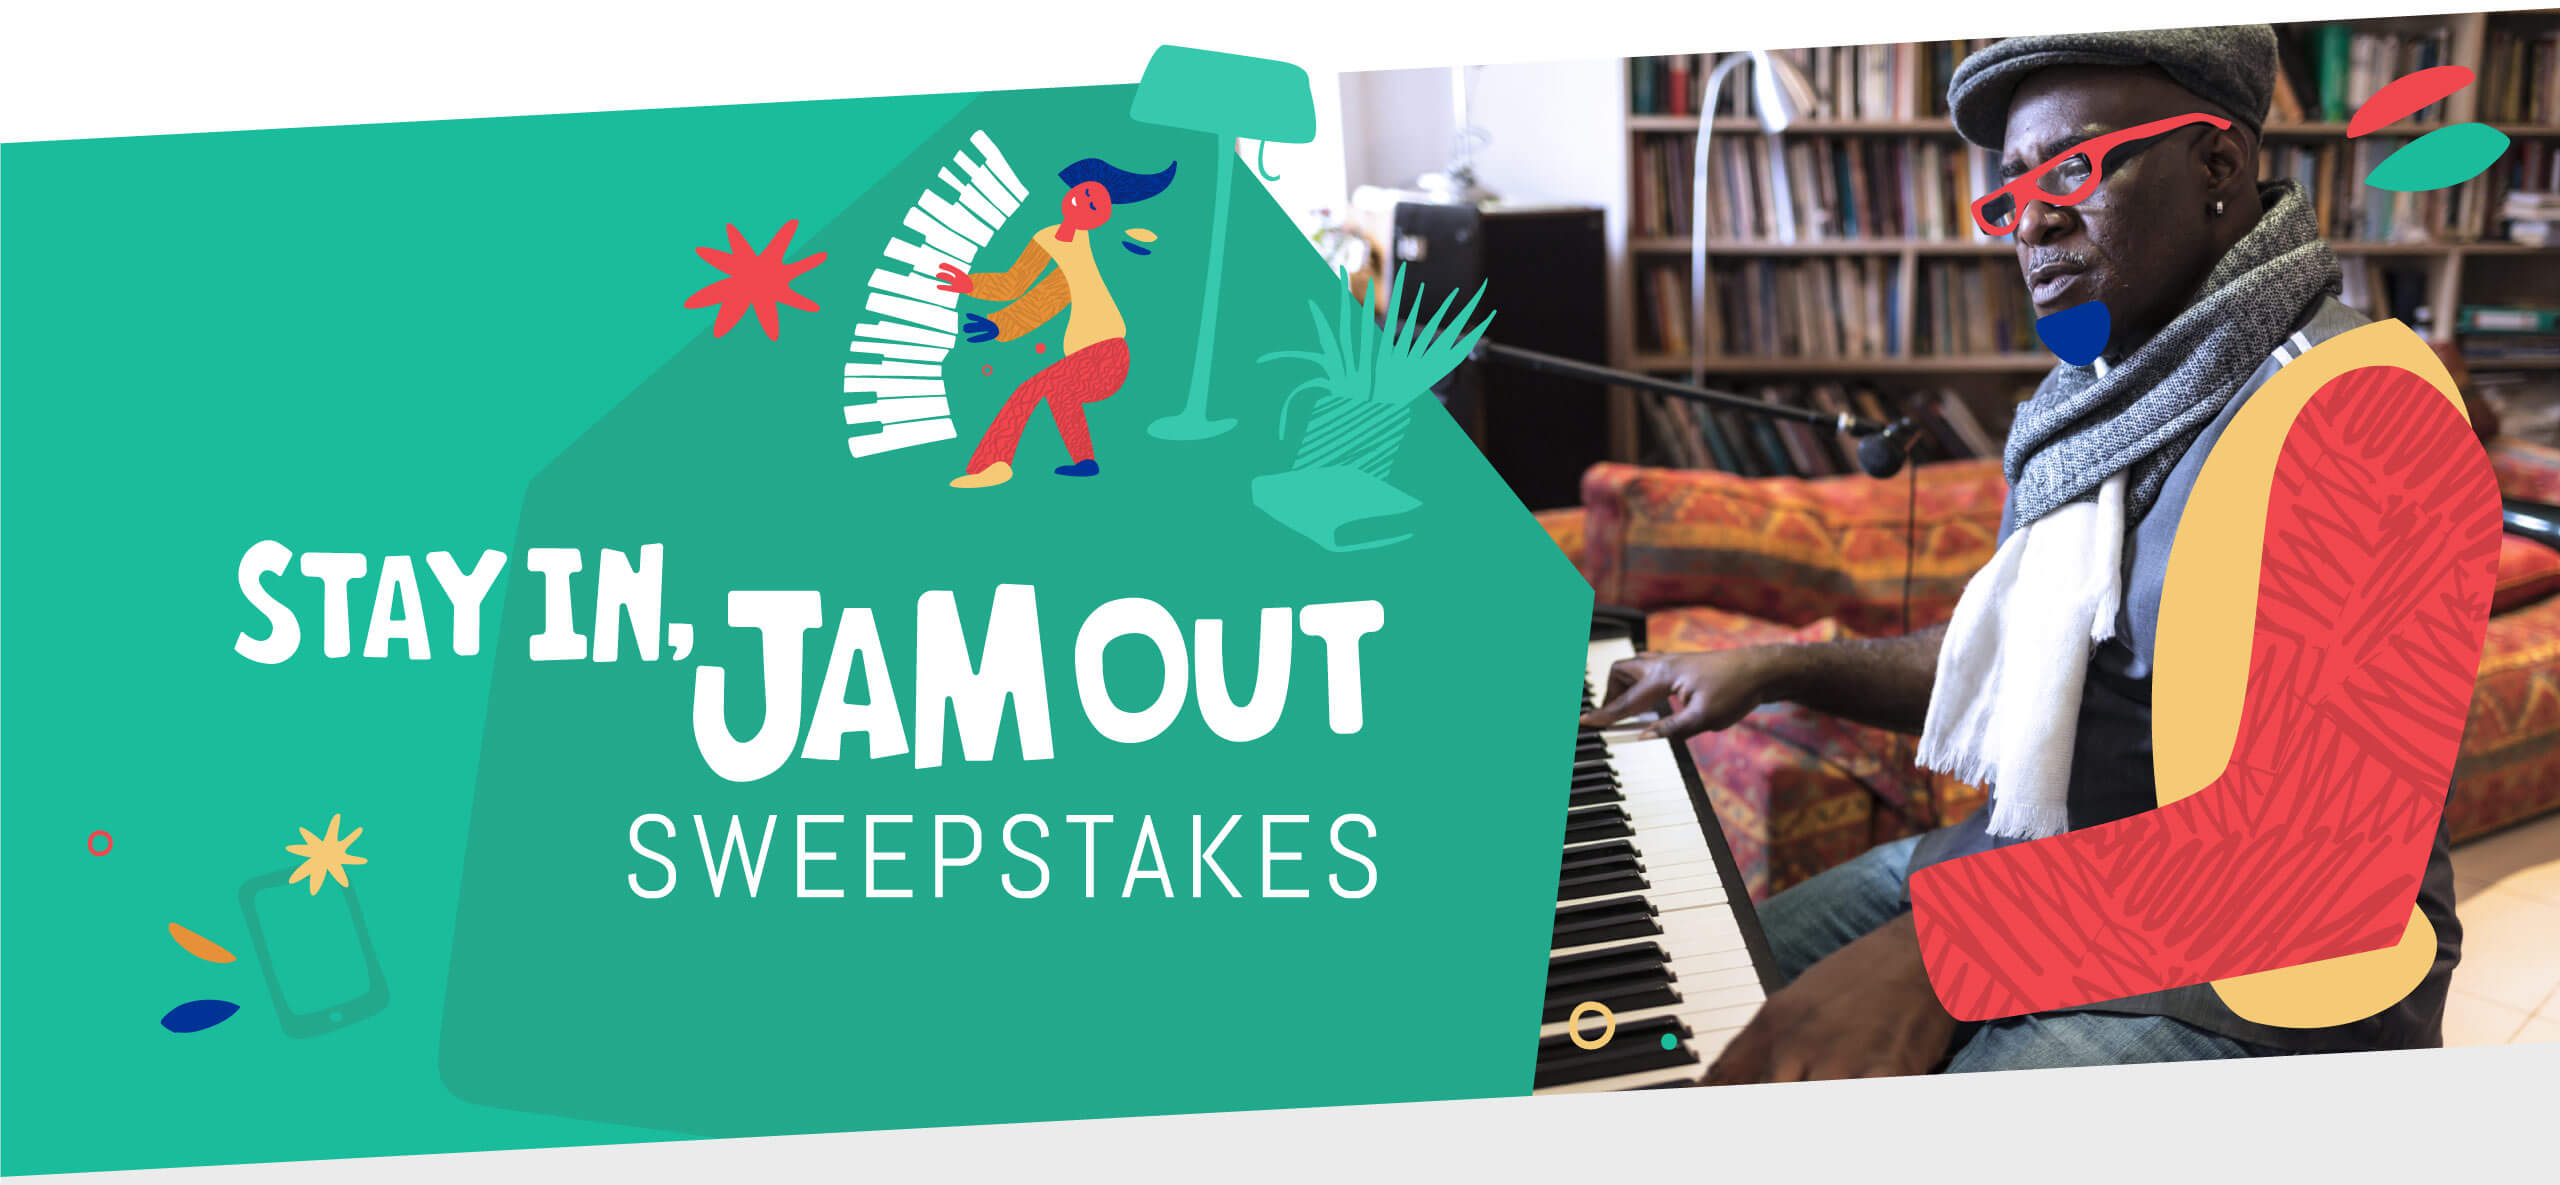 Casio 'Stay In, Jam Out' Sweepstakes